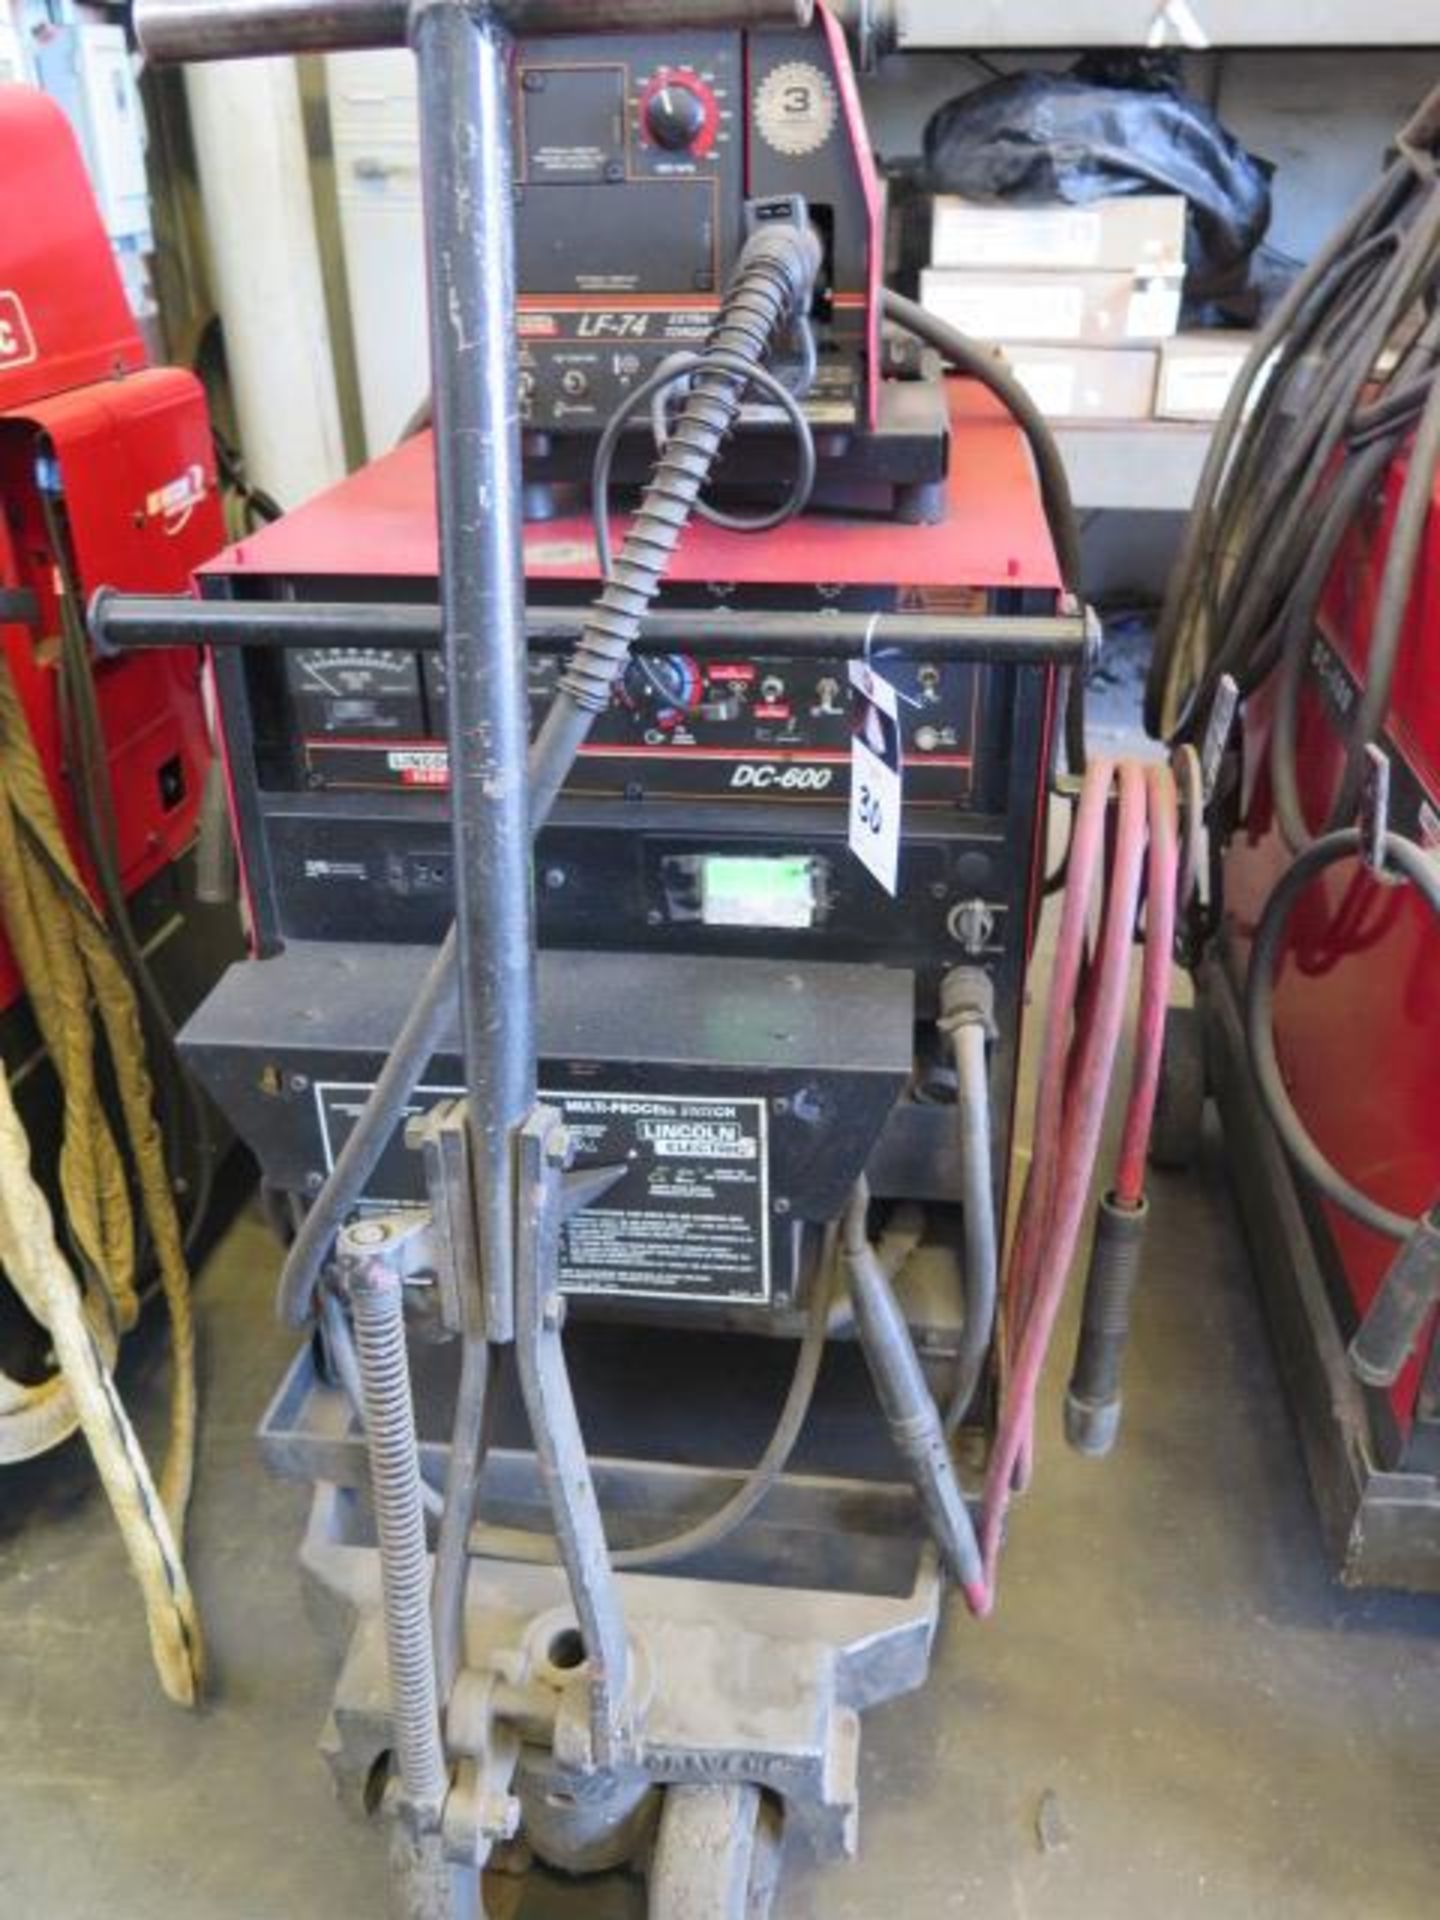 Lincoln DC-600 Arc Welding w/ Multi-Process Switch, Lincoln LF-74 Wire Feeder, SOLD AS IS